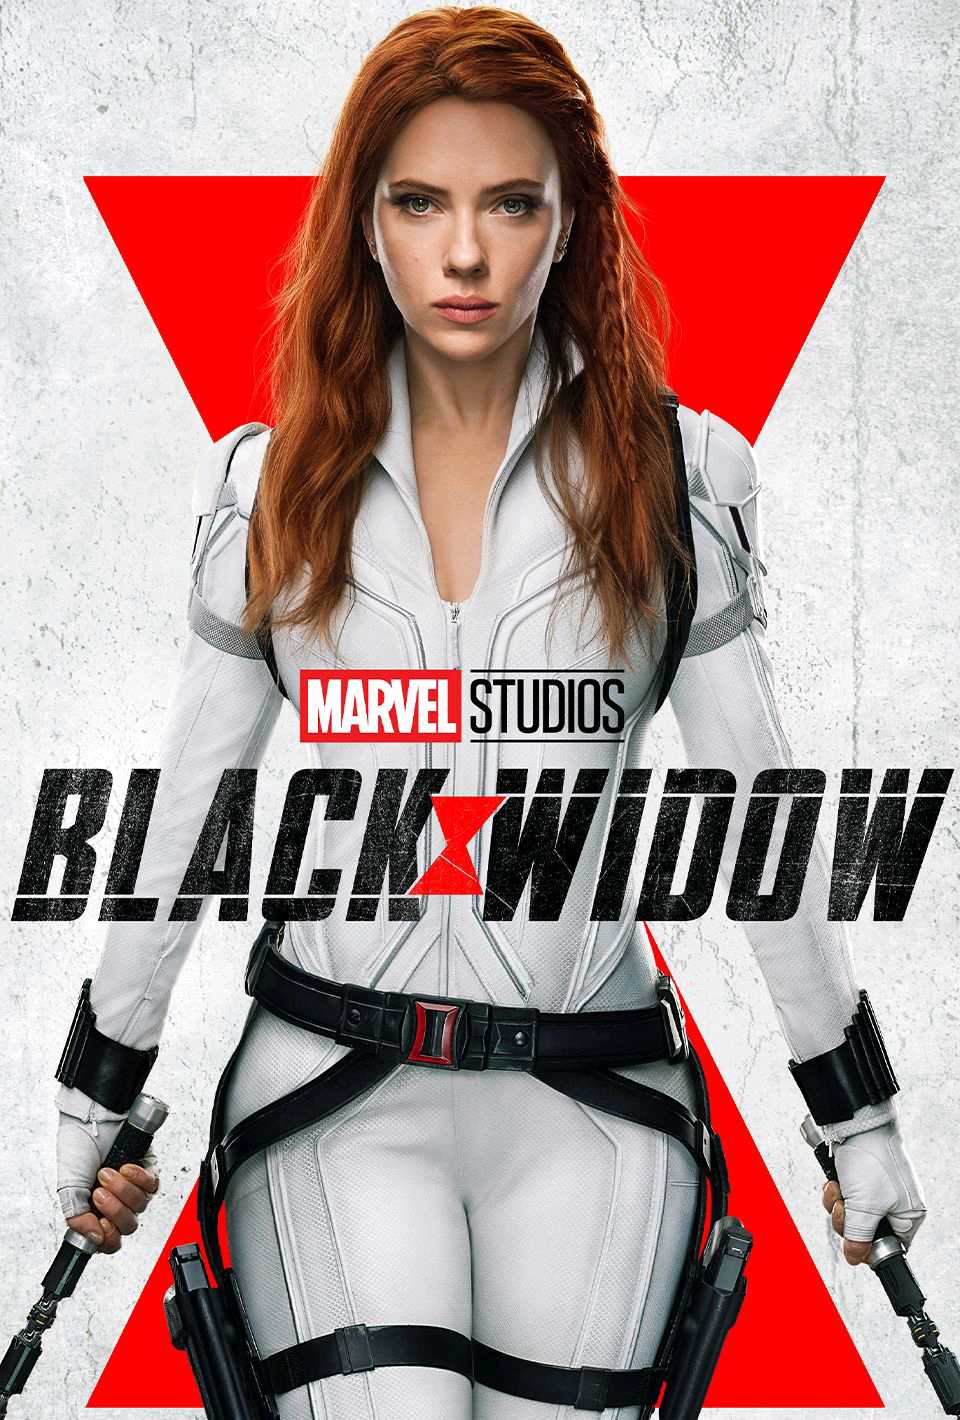 WHY BLACK WIDOW IS WORTH WATCHING